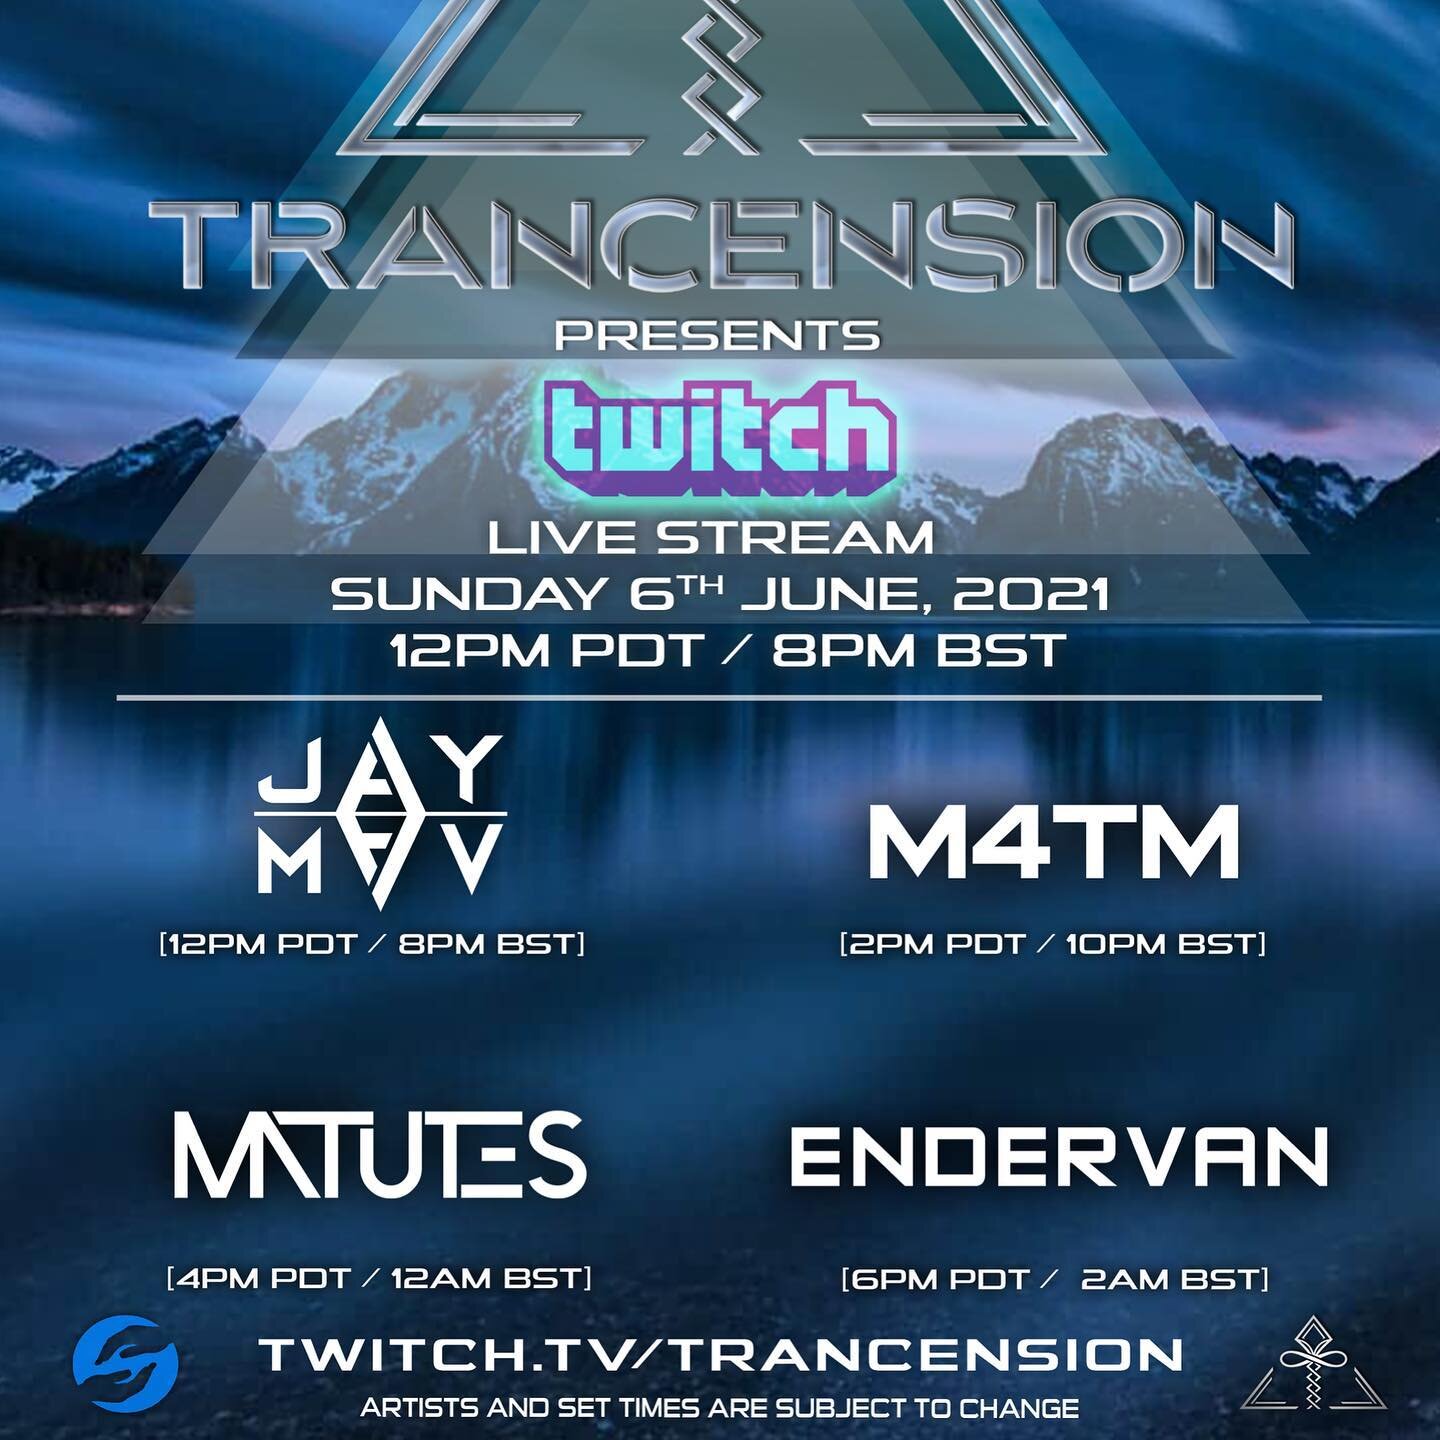 Action-packed lineup today for @trancension Sundays episode 39!! 🎶🔥feat. @jaymavmusic @texagg01 (@music4thamasses M4TM) @matutesdj &amp; @endervanmusic 🙌🏼 
.
.
www.twitch.tv/Trancension
.
.
#trance #trancension #trancefamily #trancefamilysd #tran